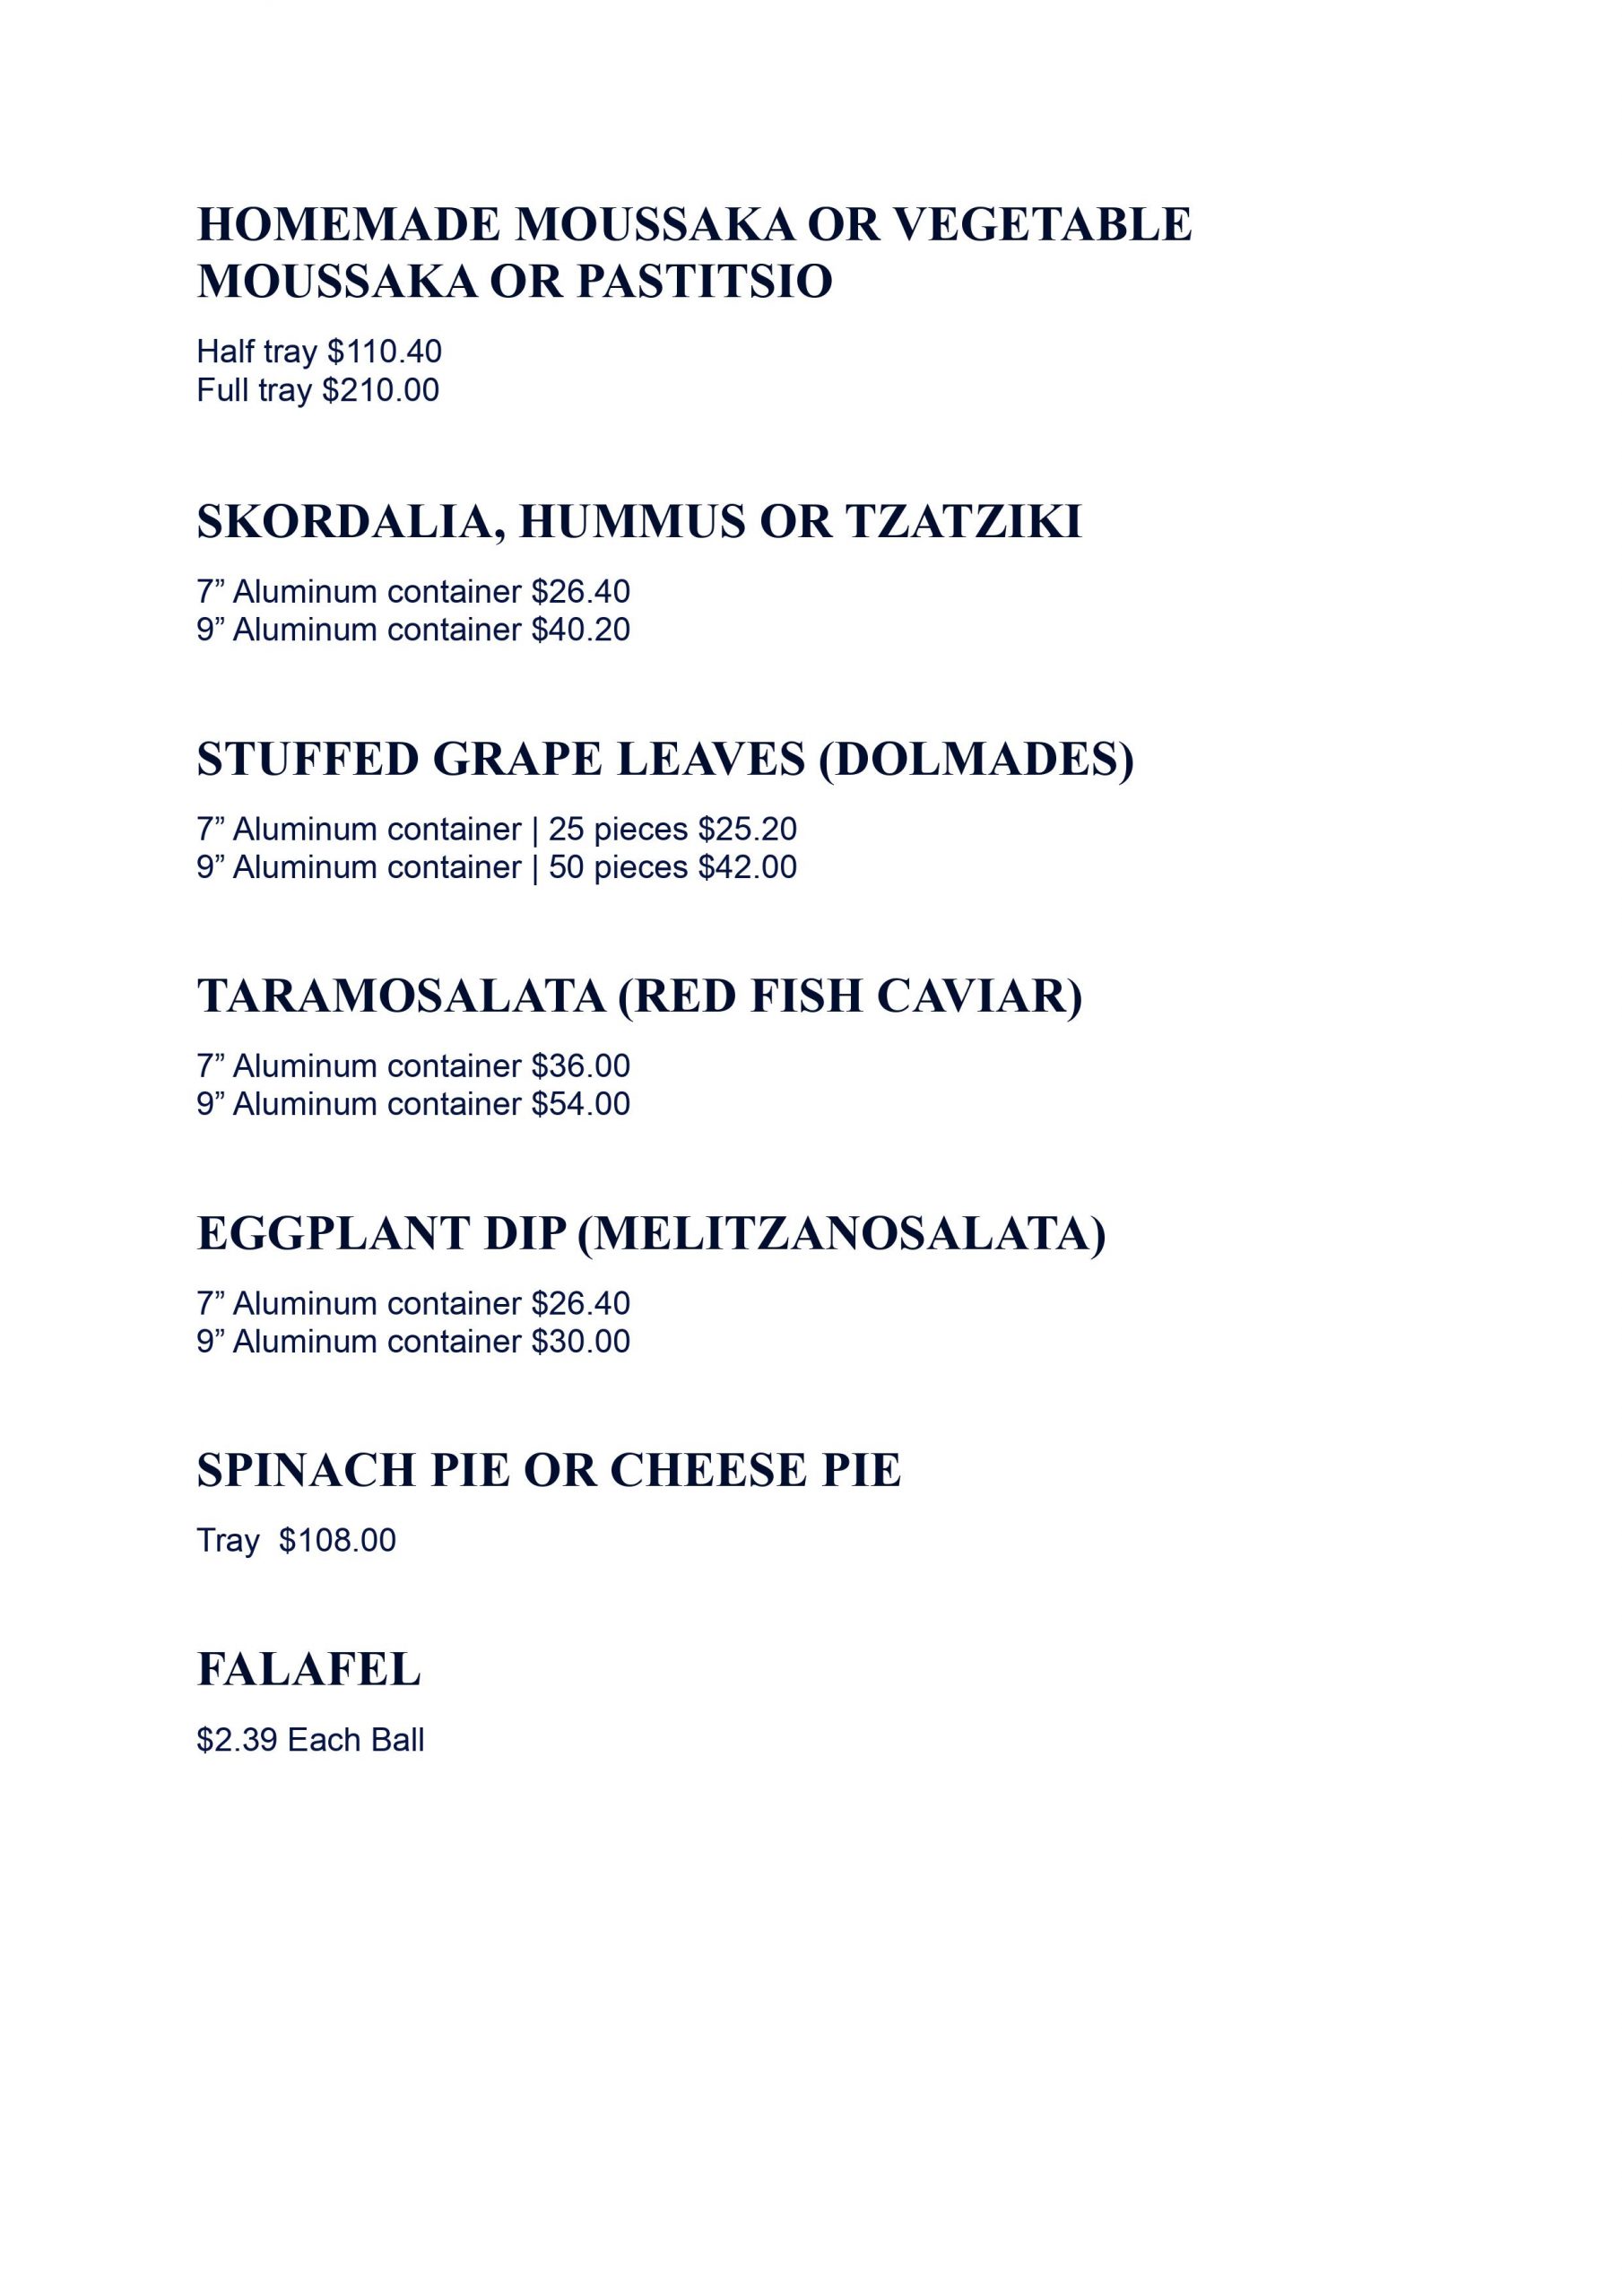 Catering Menu - page 3